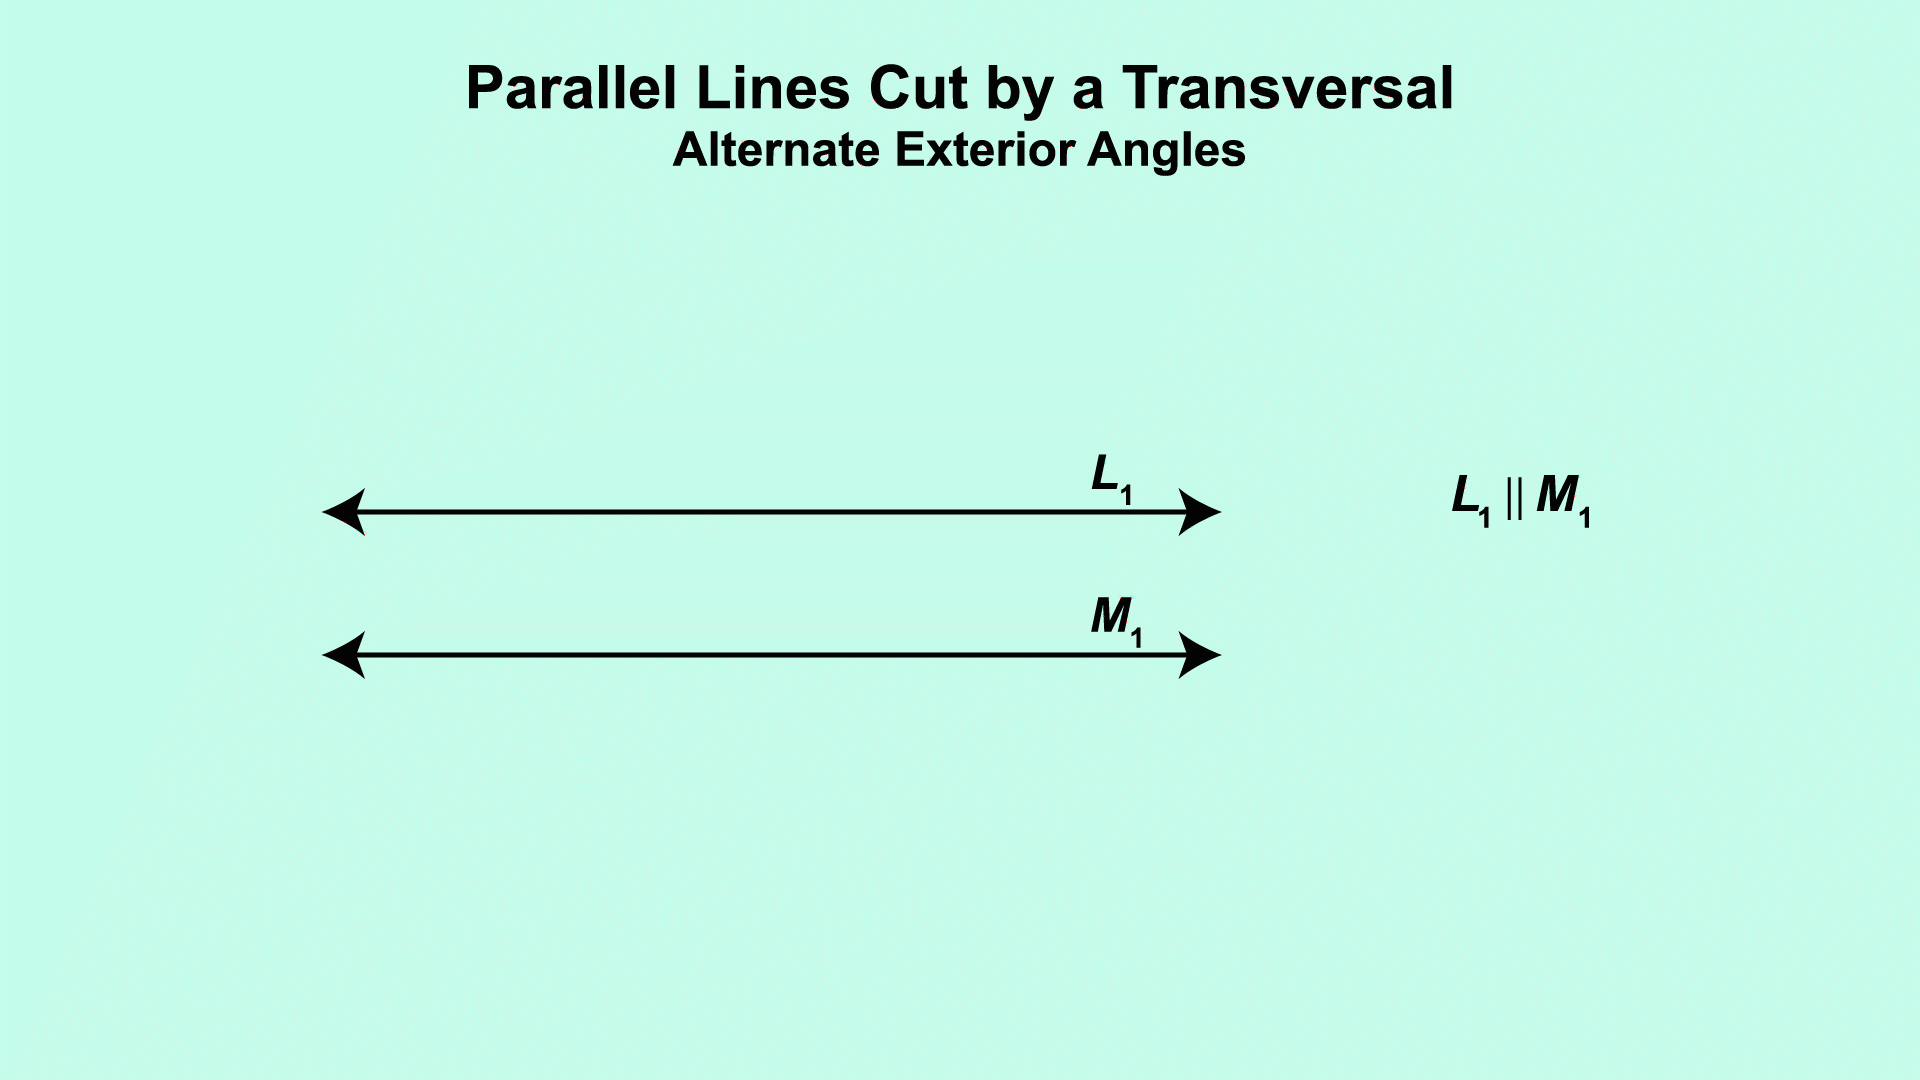 This piece of animated math clip art shows the two sets of alternate exterior angles formed when two parallel lines are cut by a transversal.